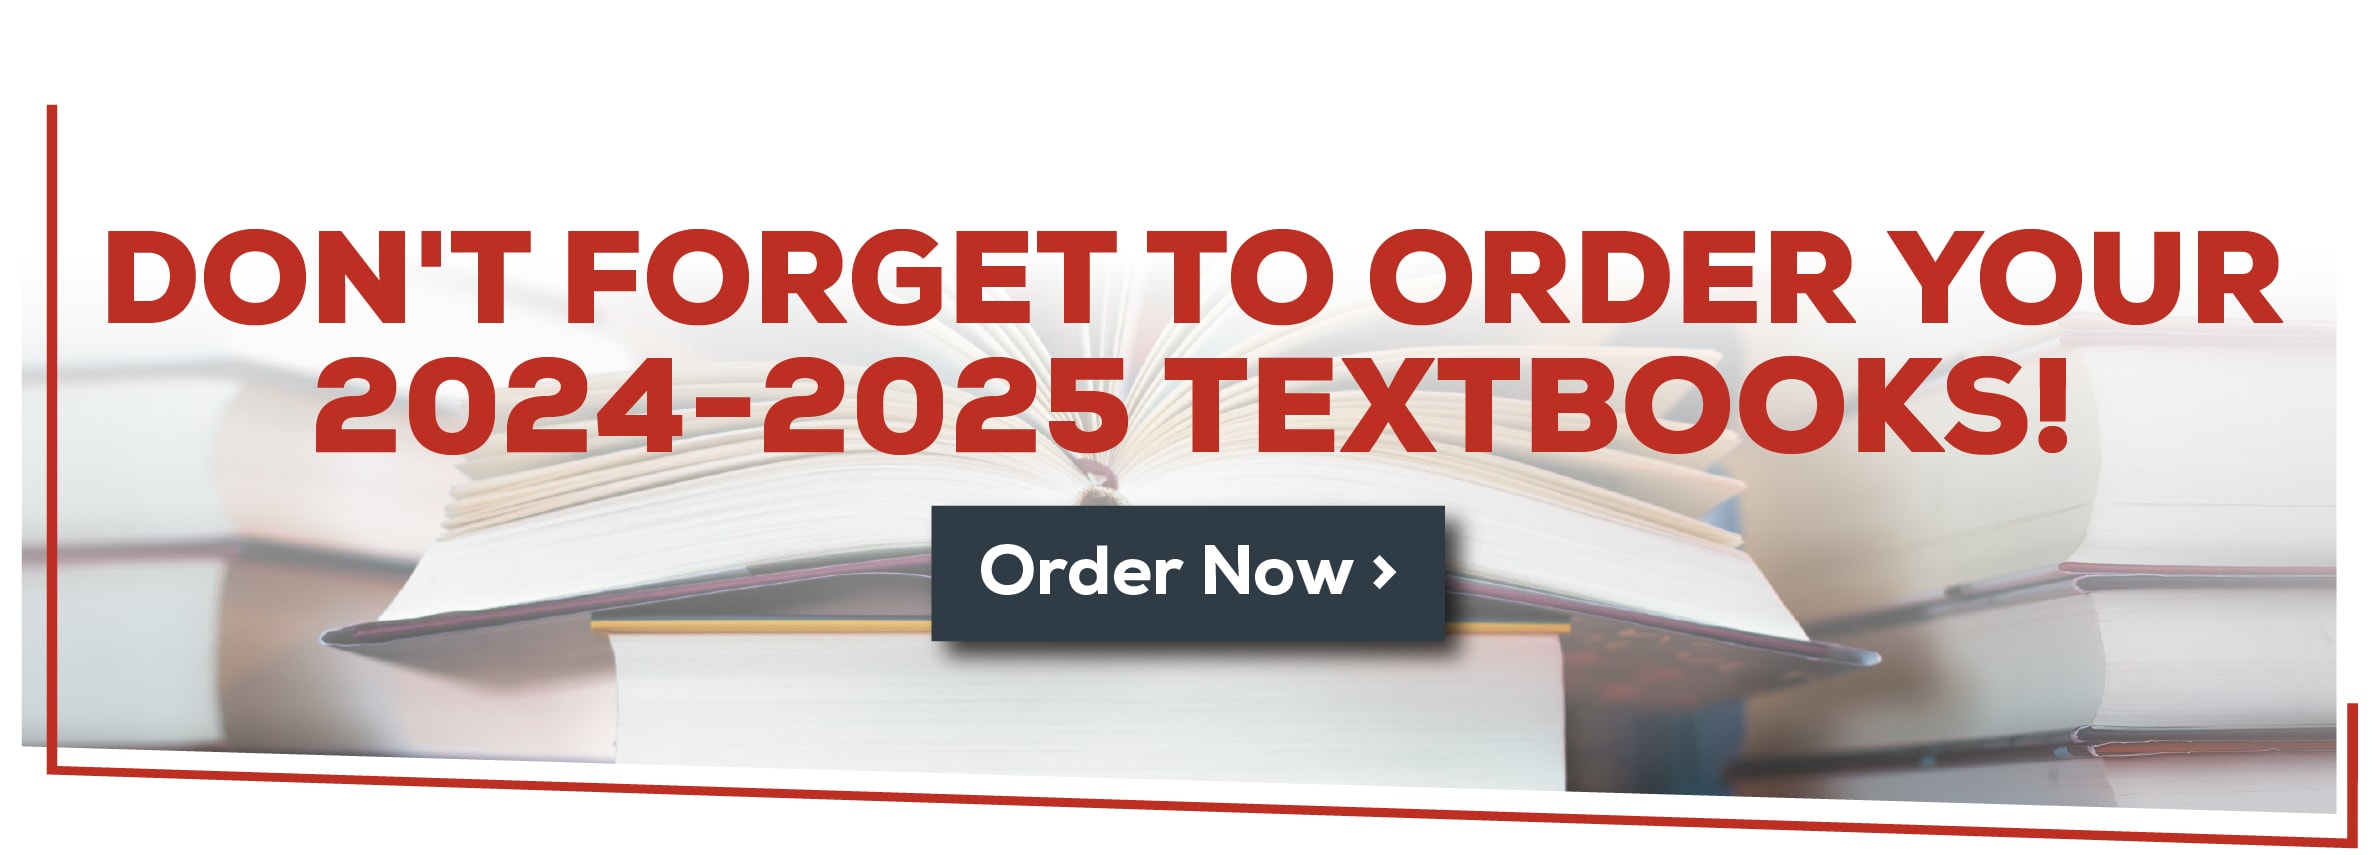 Don't Forget to order your 2024-2025 textbooks! Order Now!